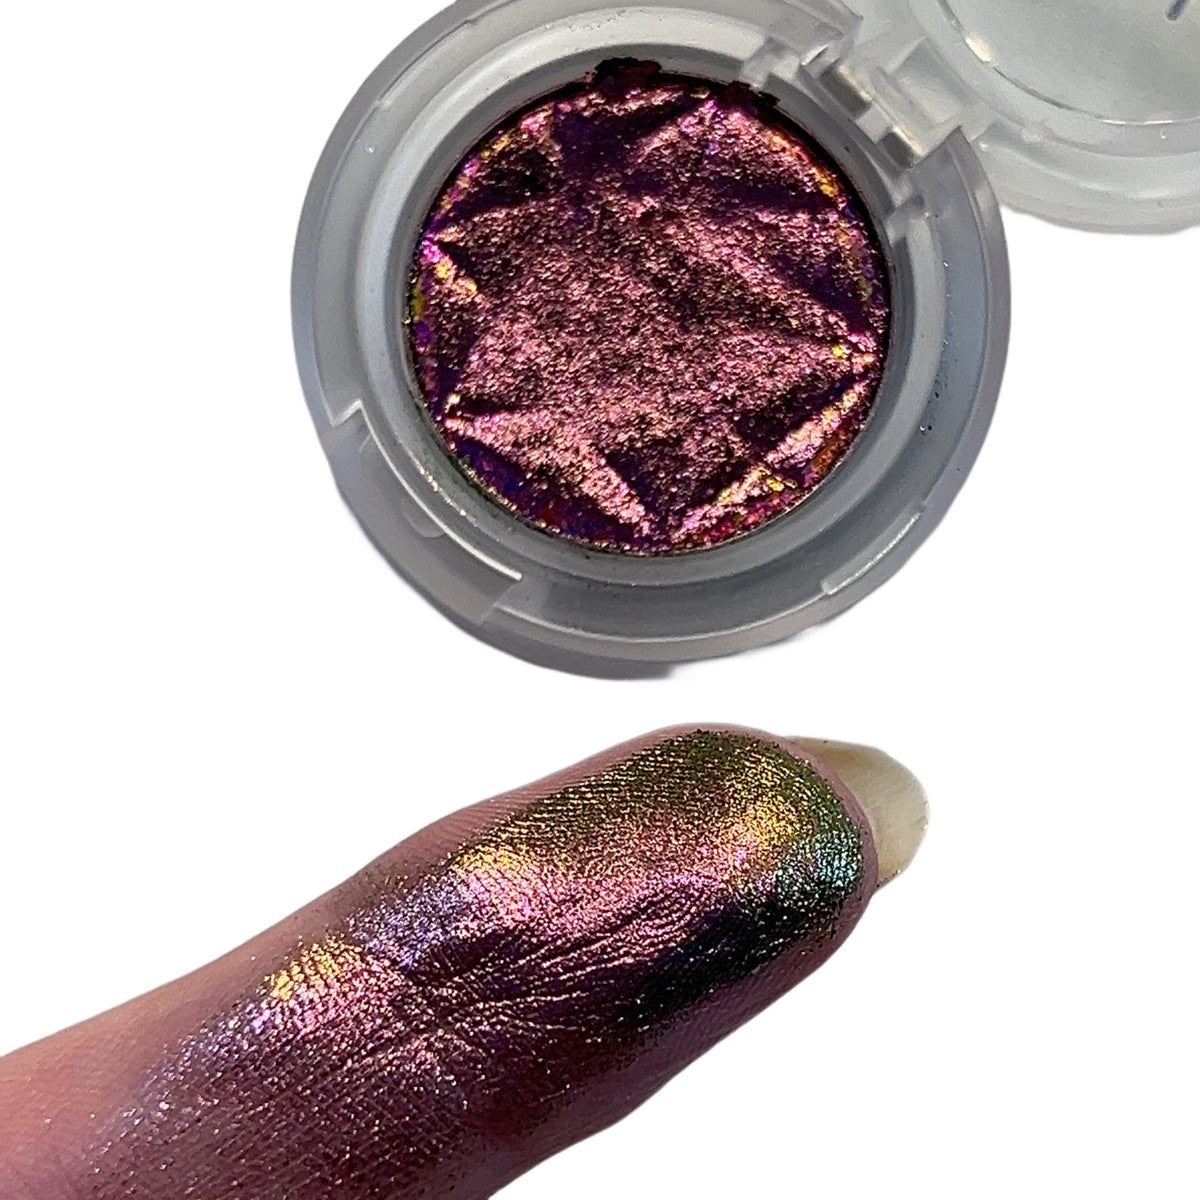 Magical Makeup Plumrise Foil Multichrome Eyeshadow 3g